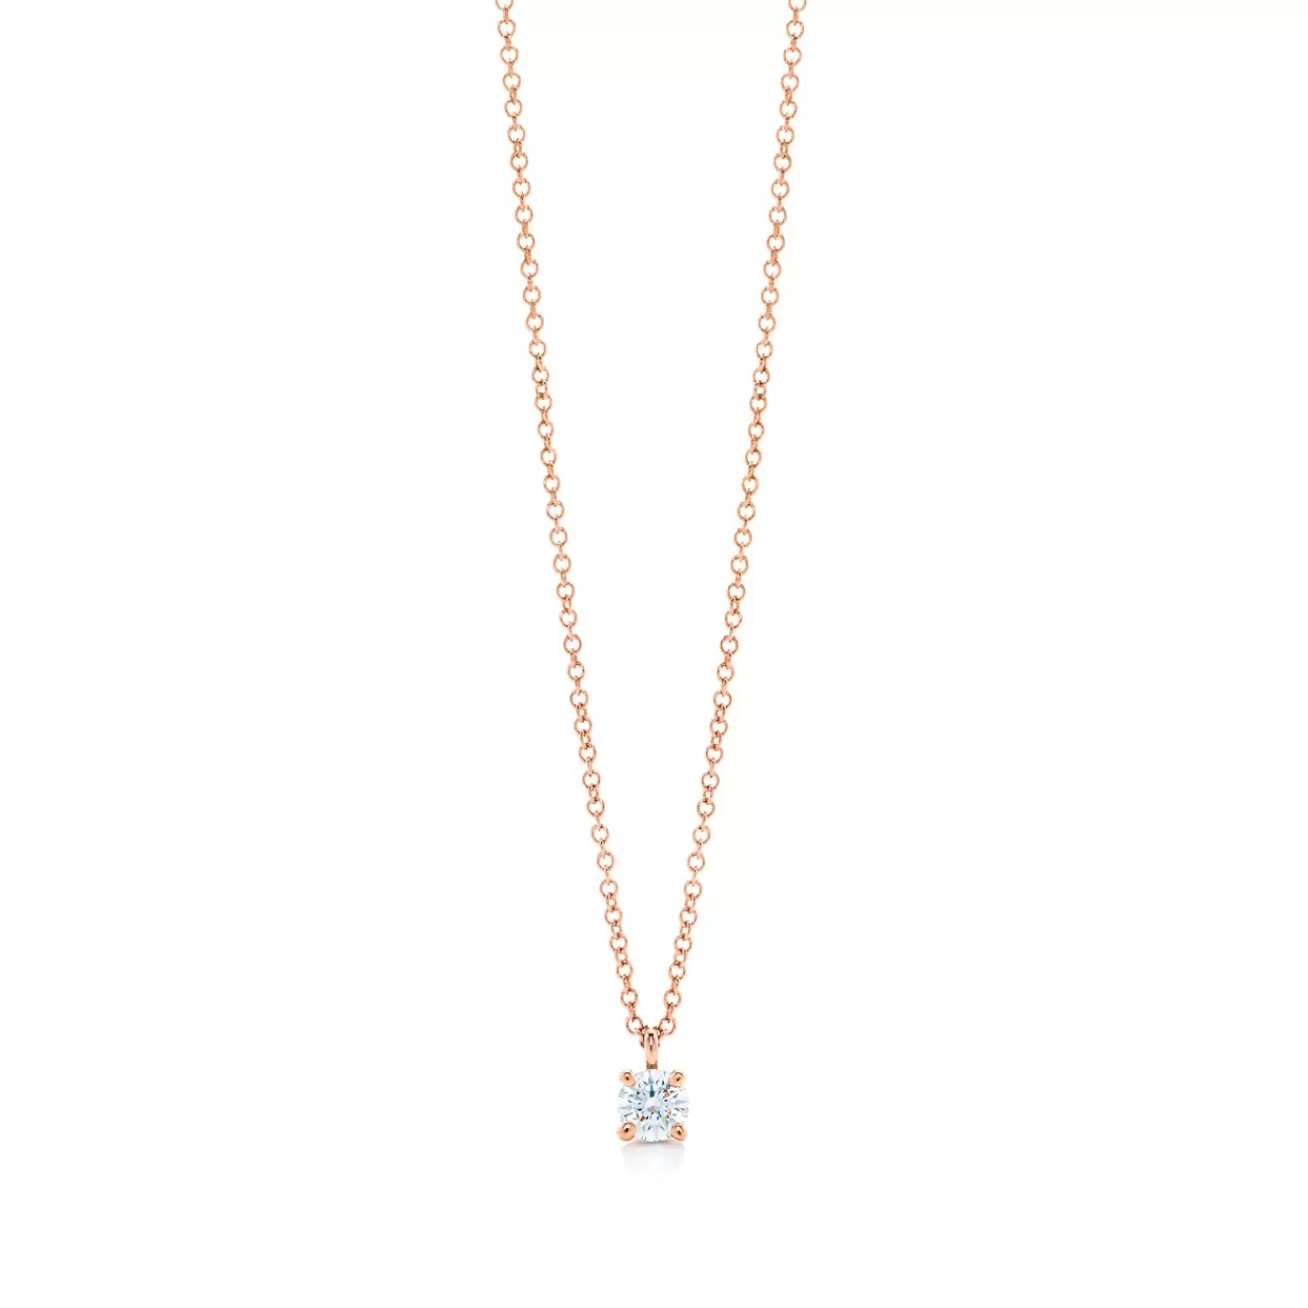 Tiffany & Co. Tiffany solitaire diamond pendant in 18k rose gold. | ^ Necklaces & Pendants | Gifts for Her